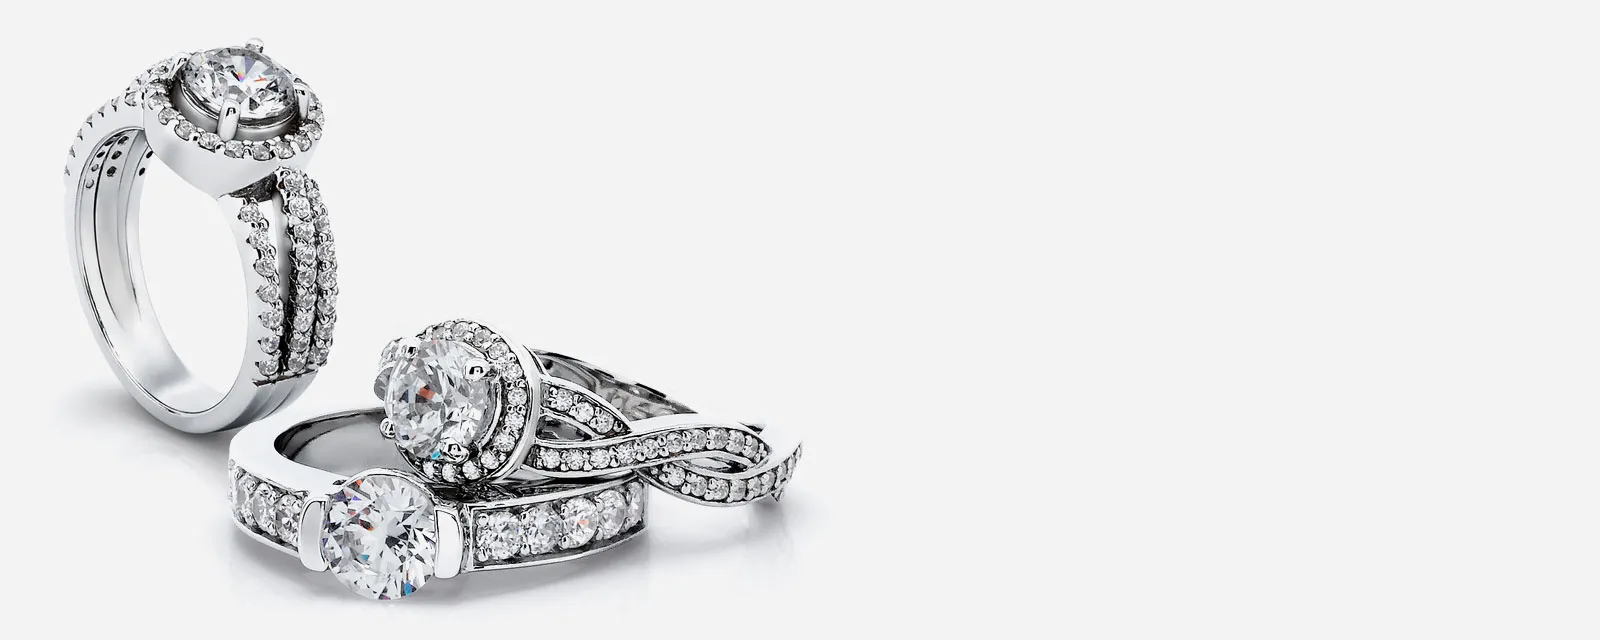 Create Your Own Engagement Ring Select your ring setting and pair it with your ideal diamond. The Jewelry Source El Segundo, CA